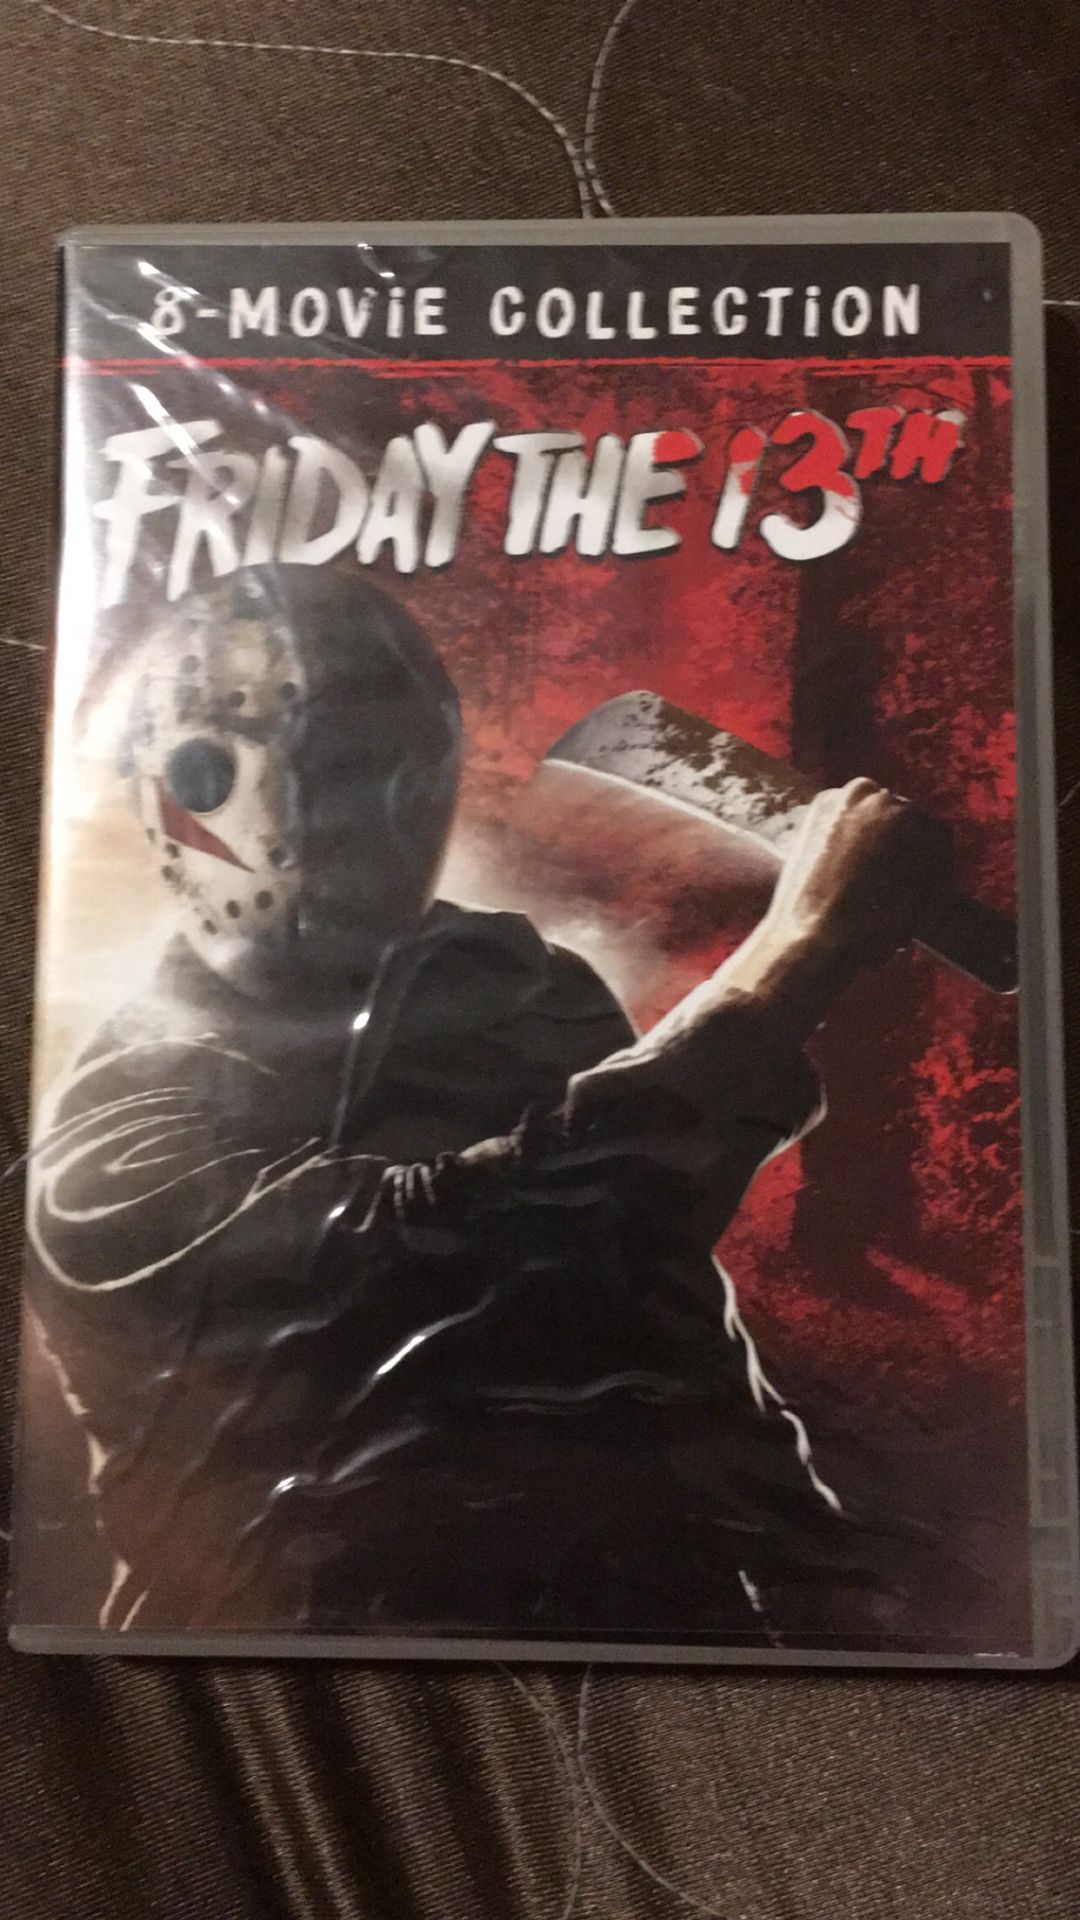 Friday the 13 movie collection